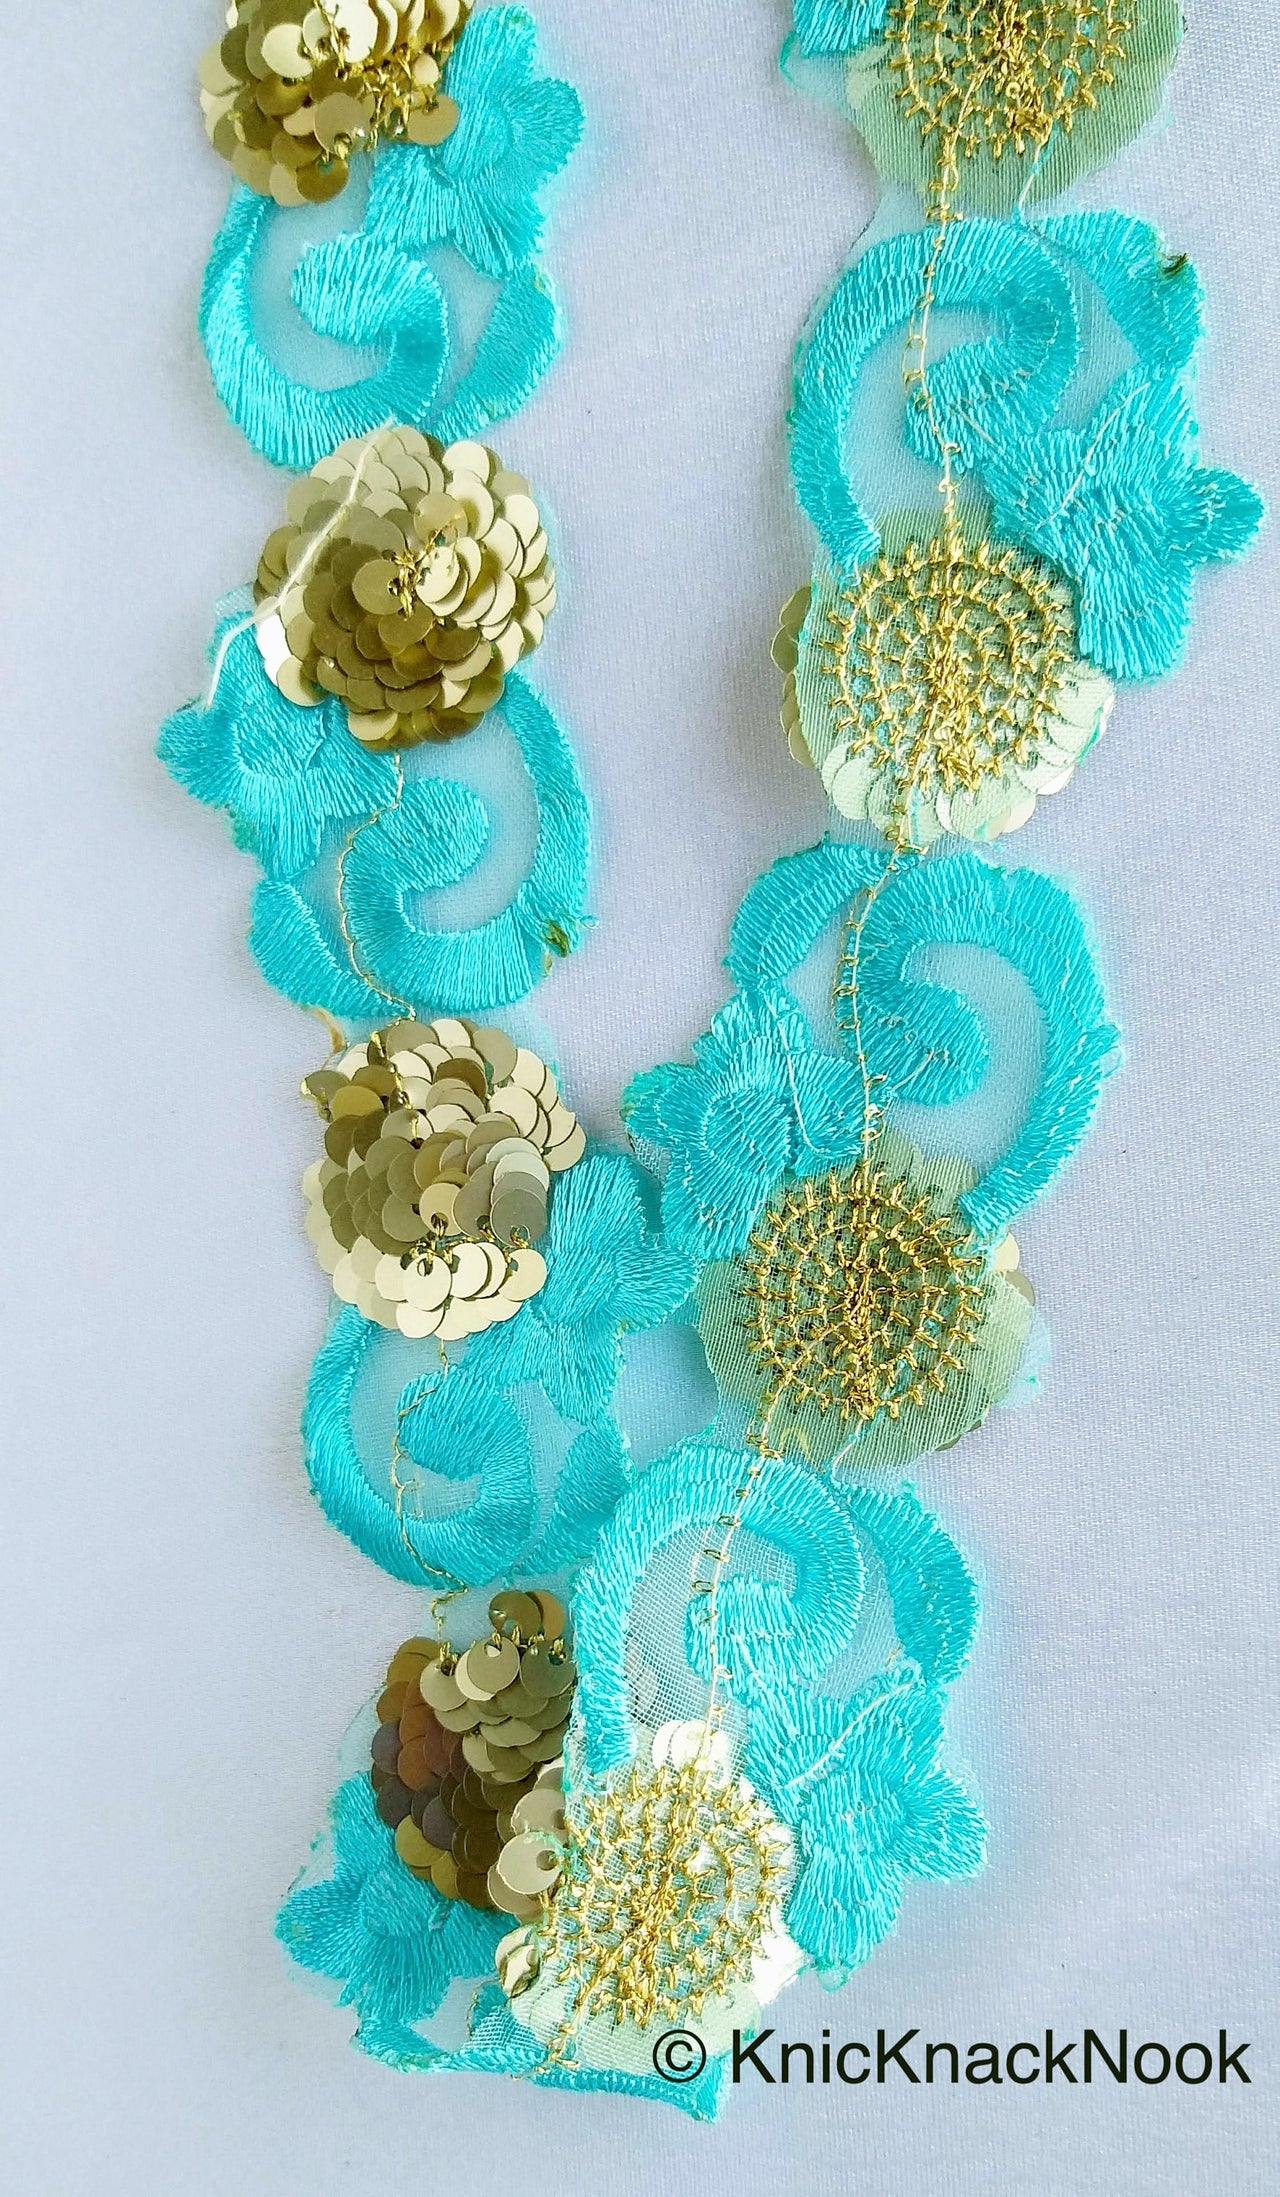 Wholesale Blue Lace Trim, Tissue Fabric Cutwork With Floral Embroidery & Gold Sequins, Indian Embroidery